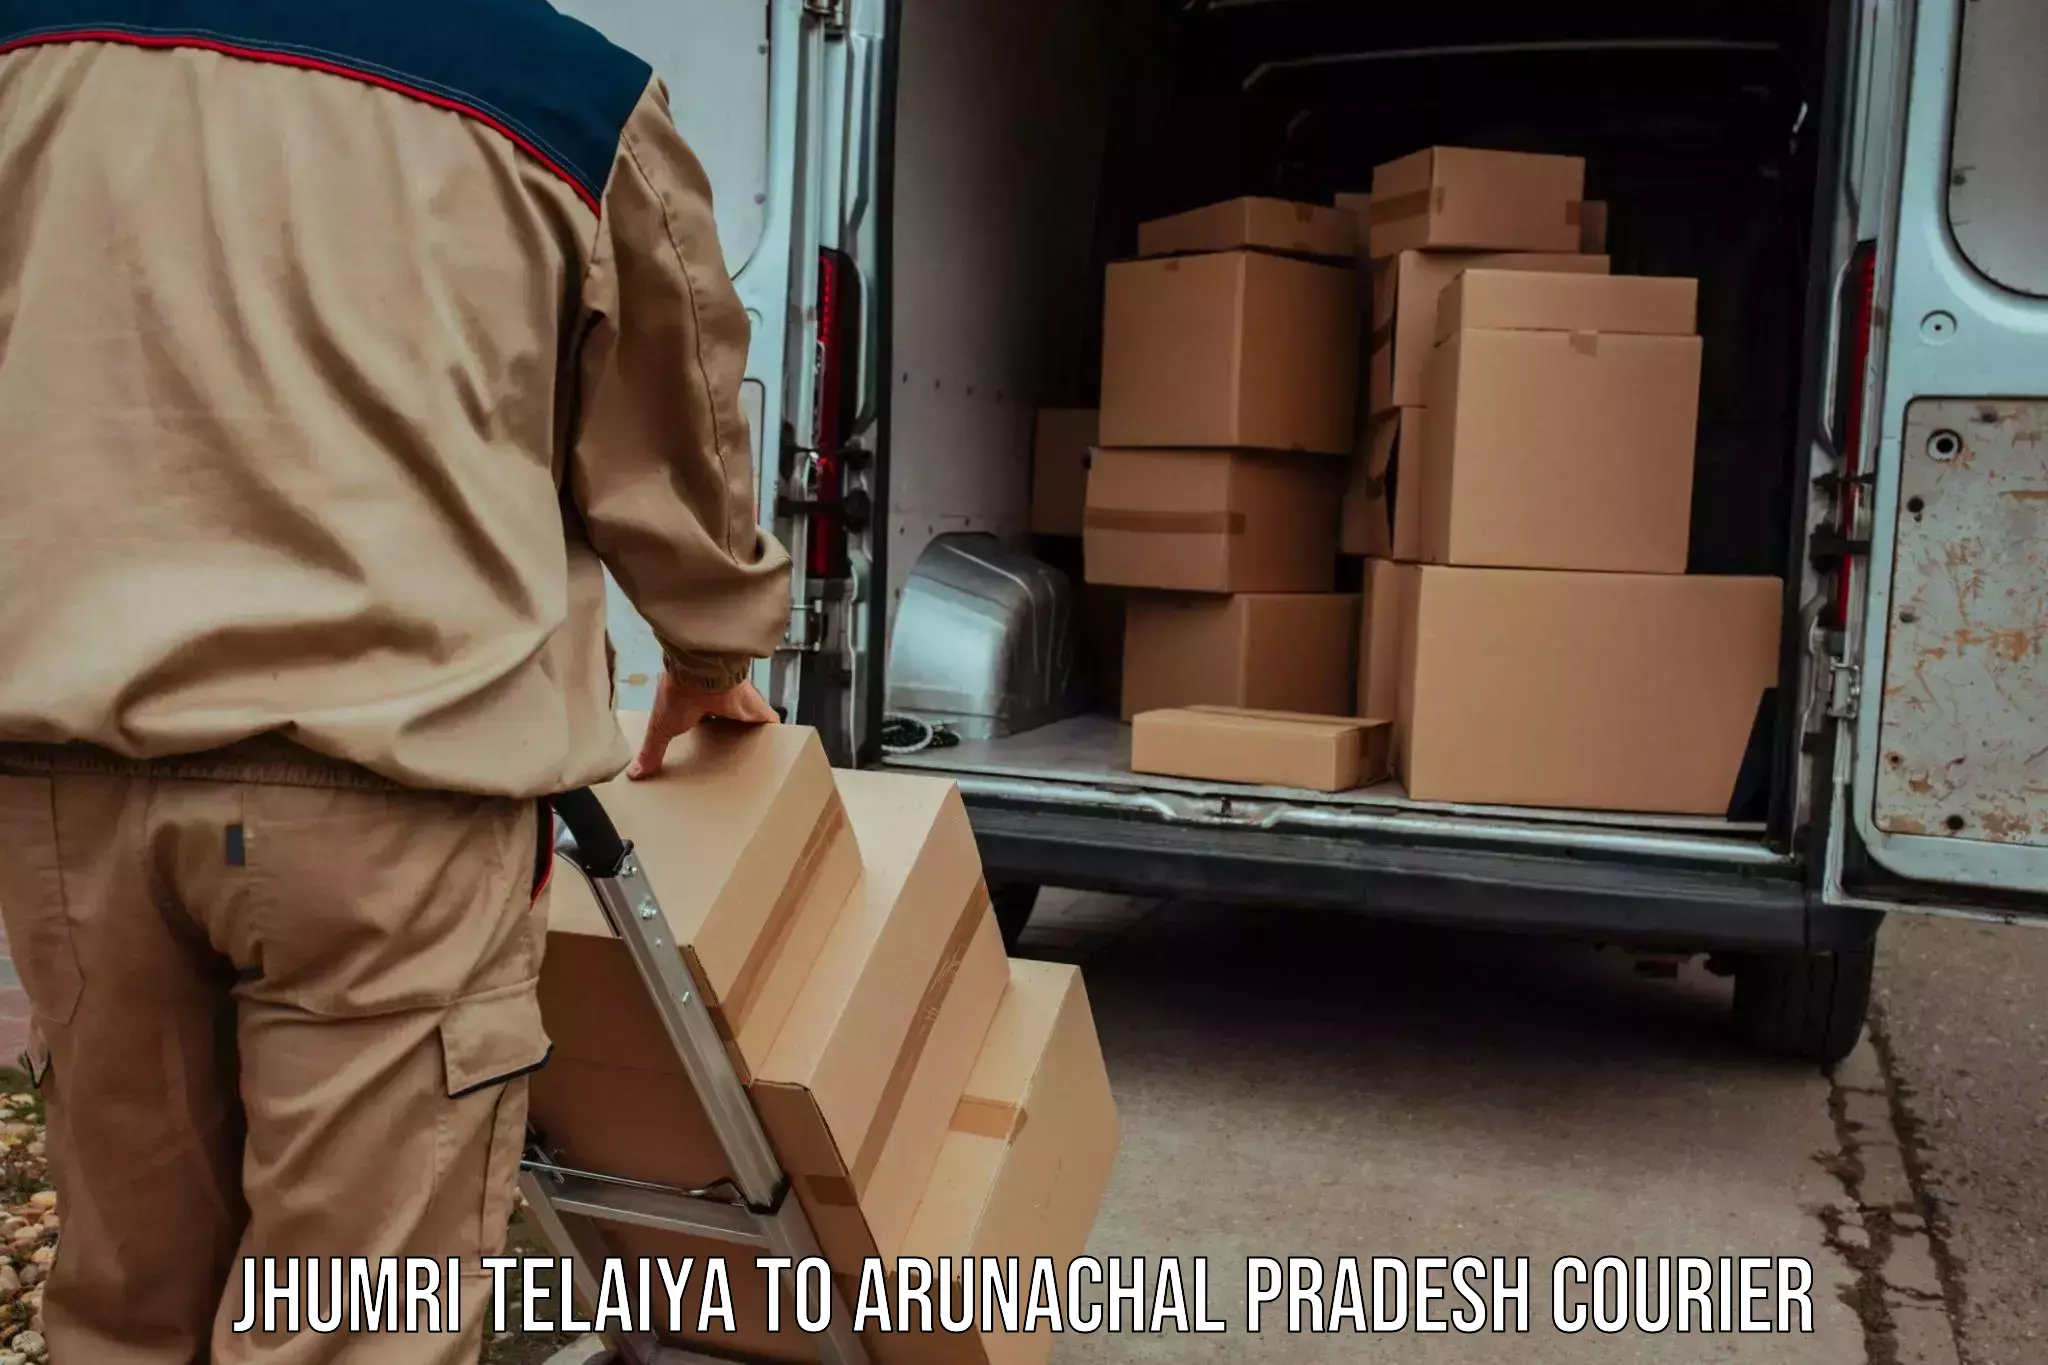 Reliable parcel services in Jhumri Telaiya to Bomdila